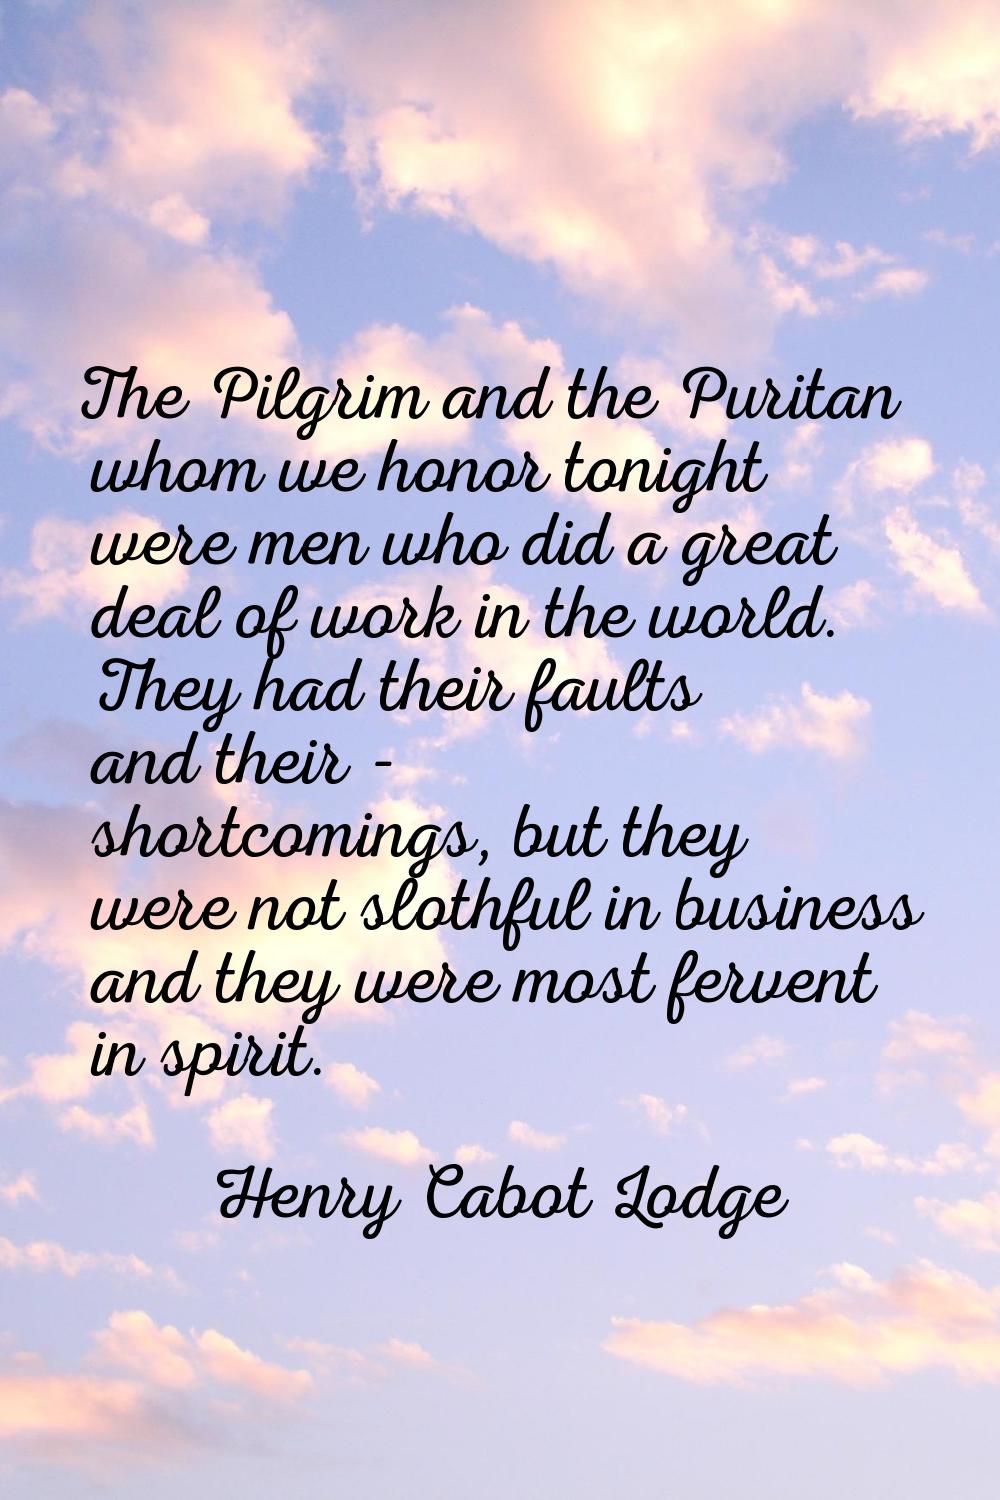 The Pilgrim and the Puritan whom we honor tonight were men who did a great deal of work in the worl